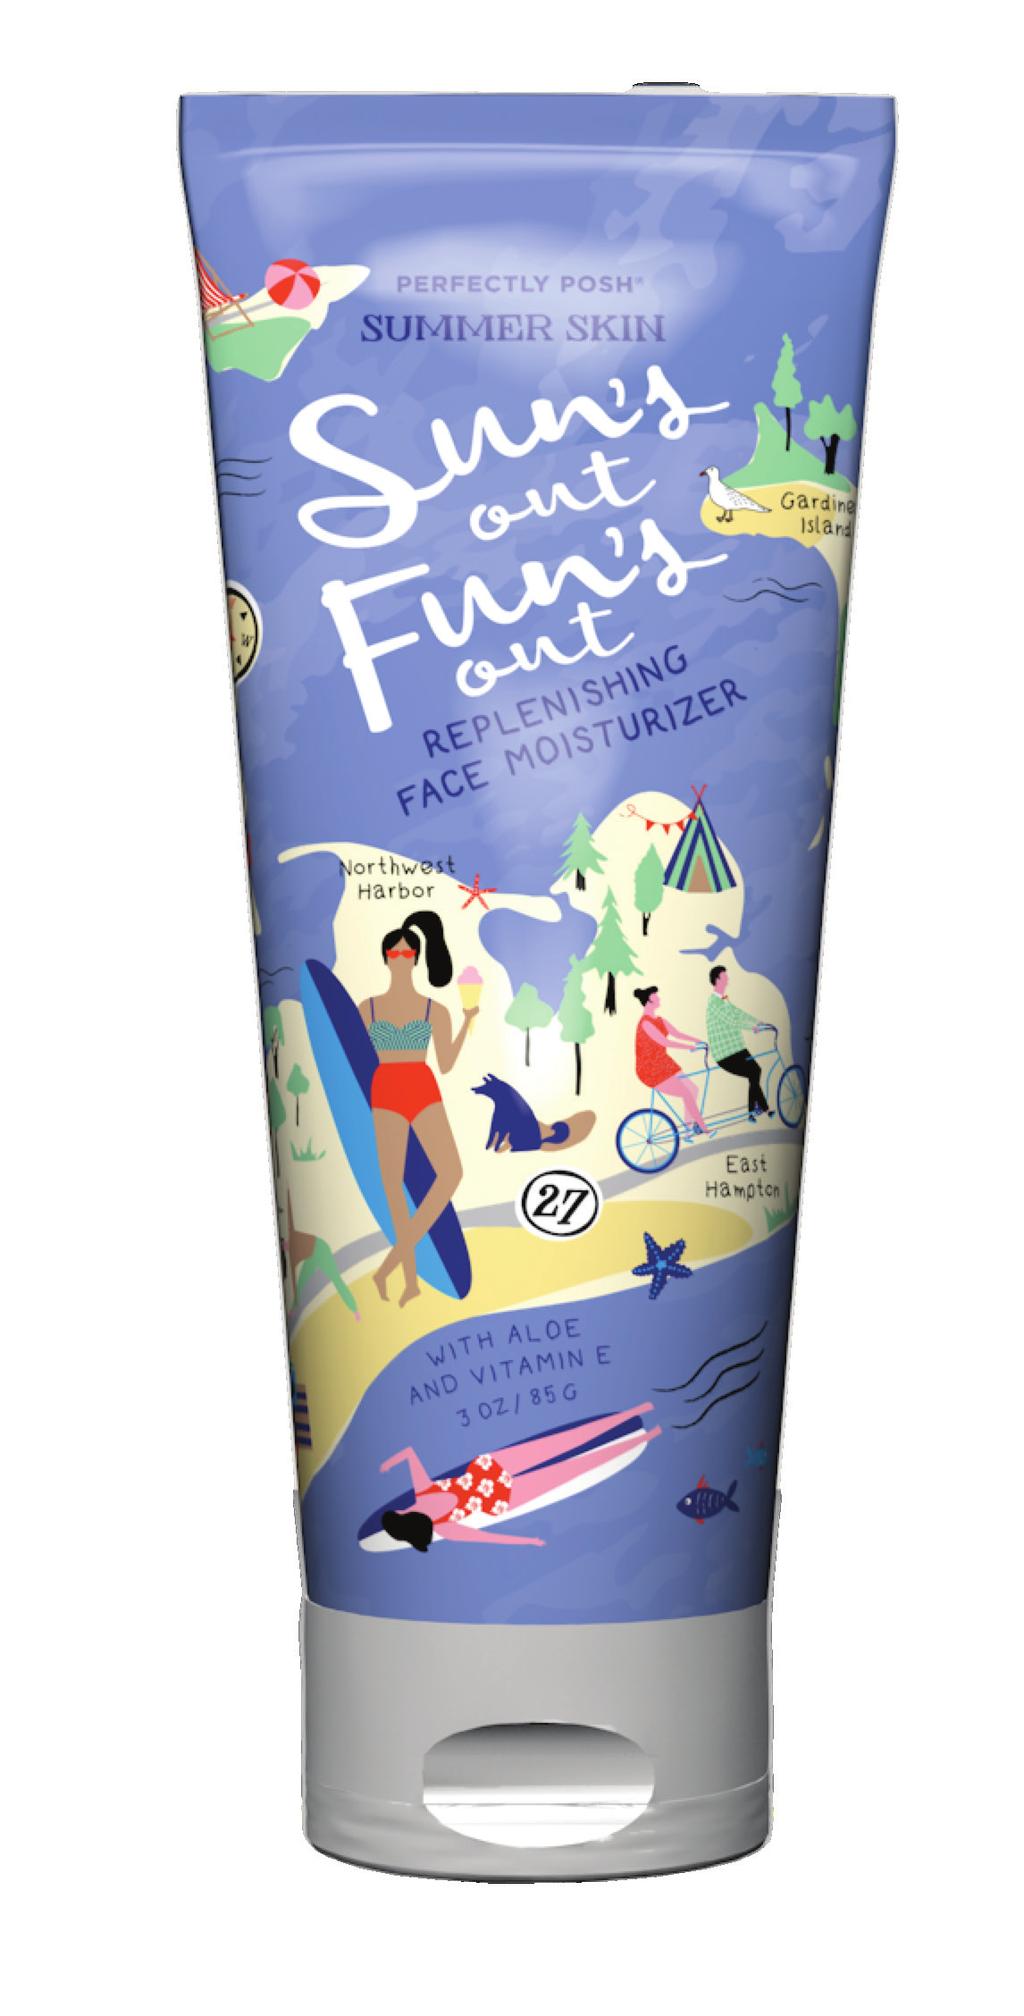 Cool off with Sun's Out, Fun's Out Replenishing Face Moisturizer.